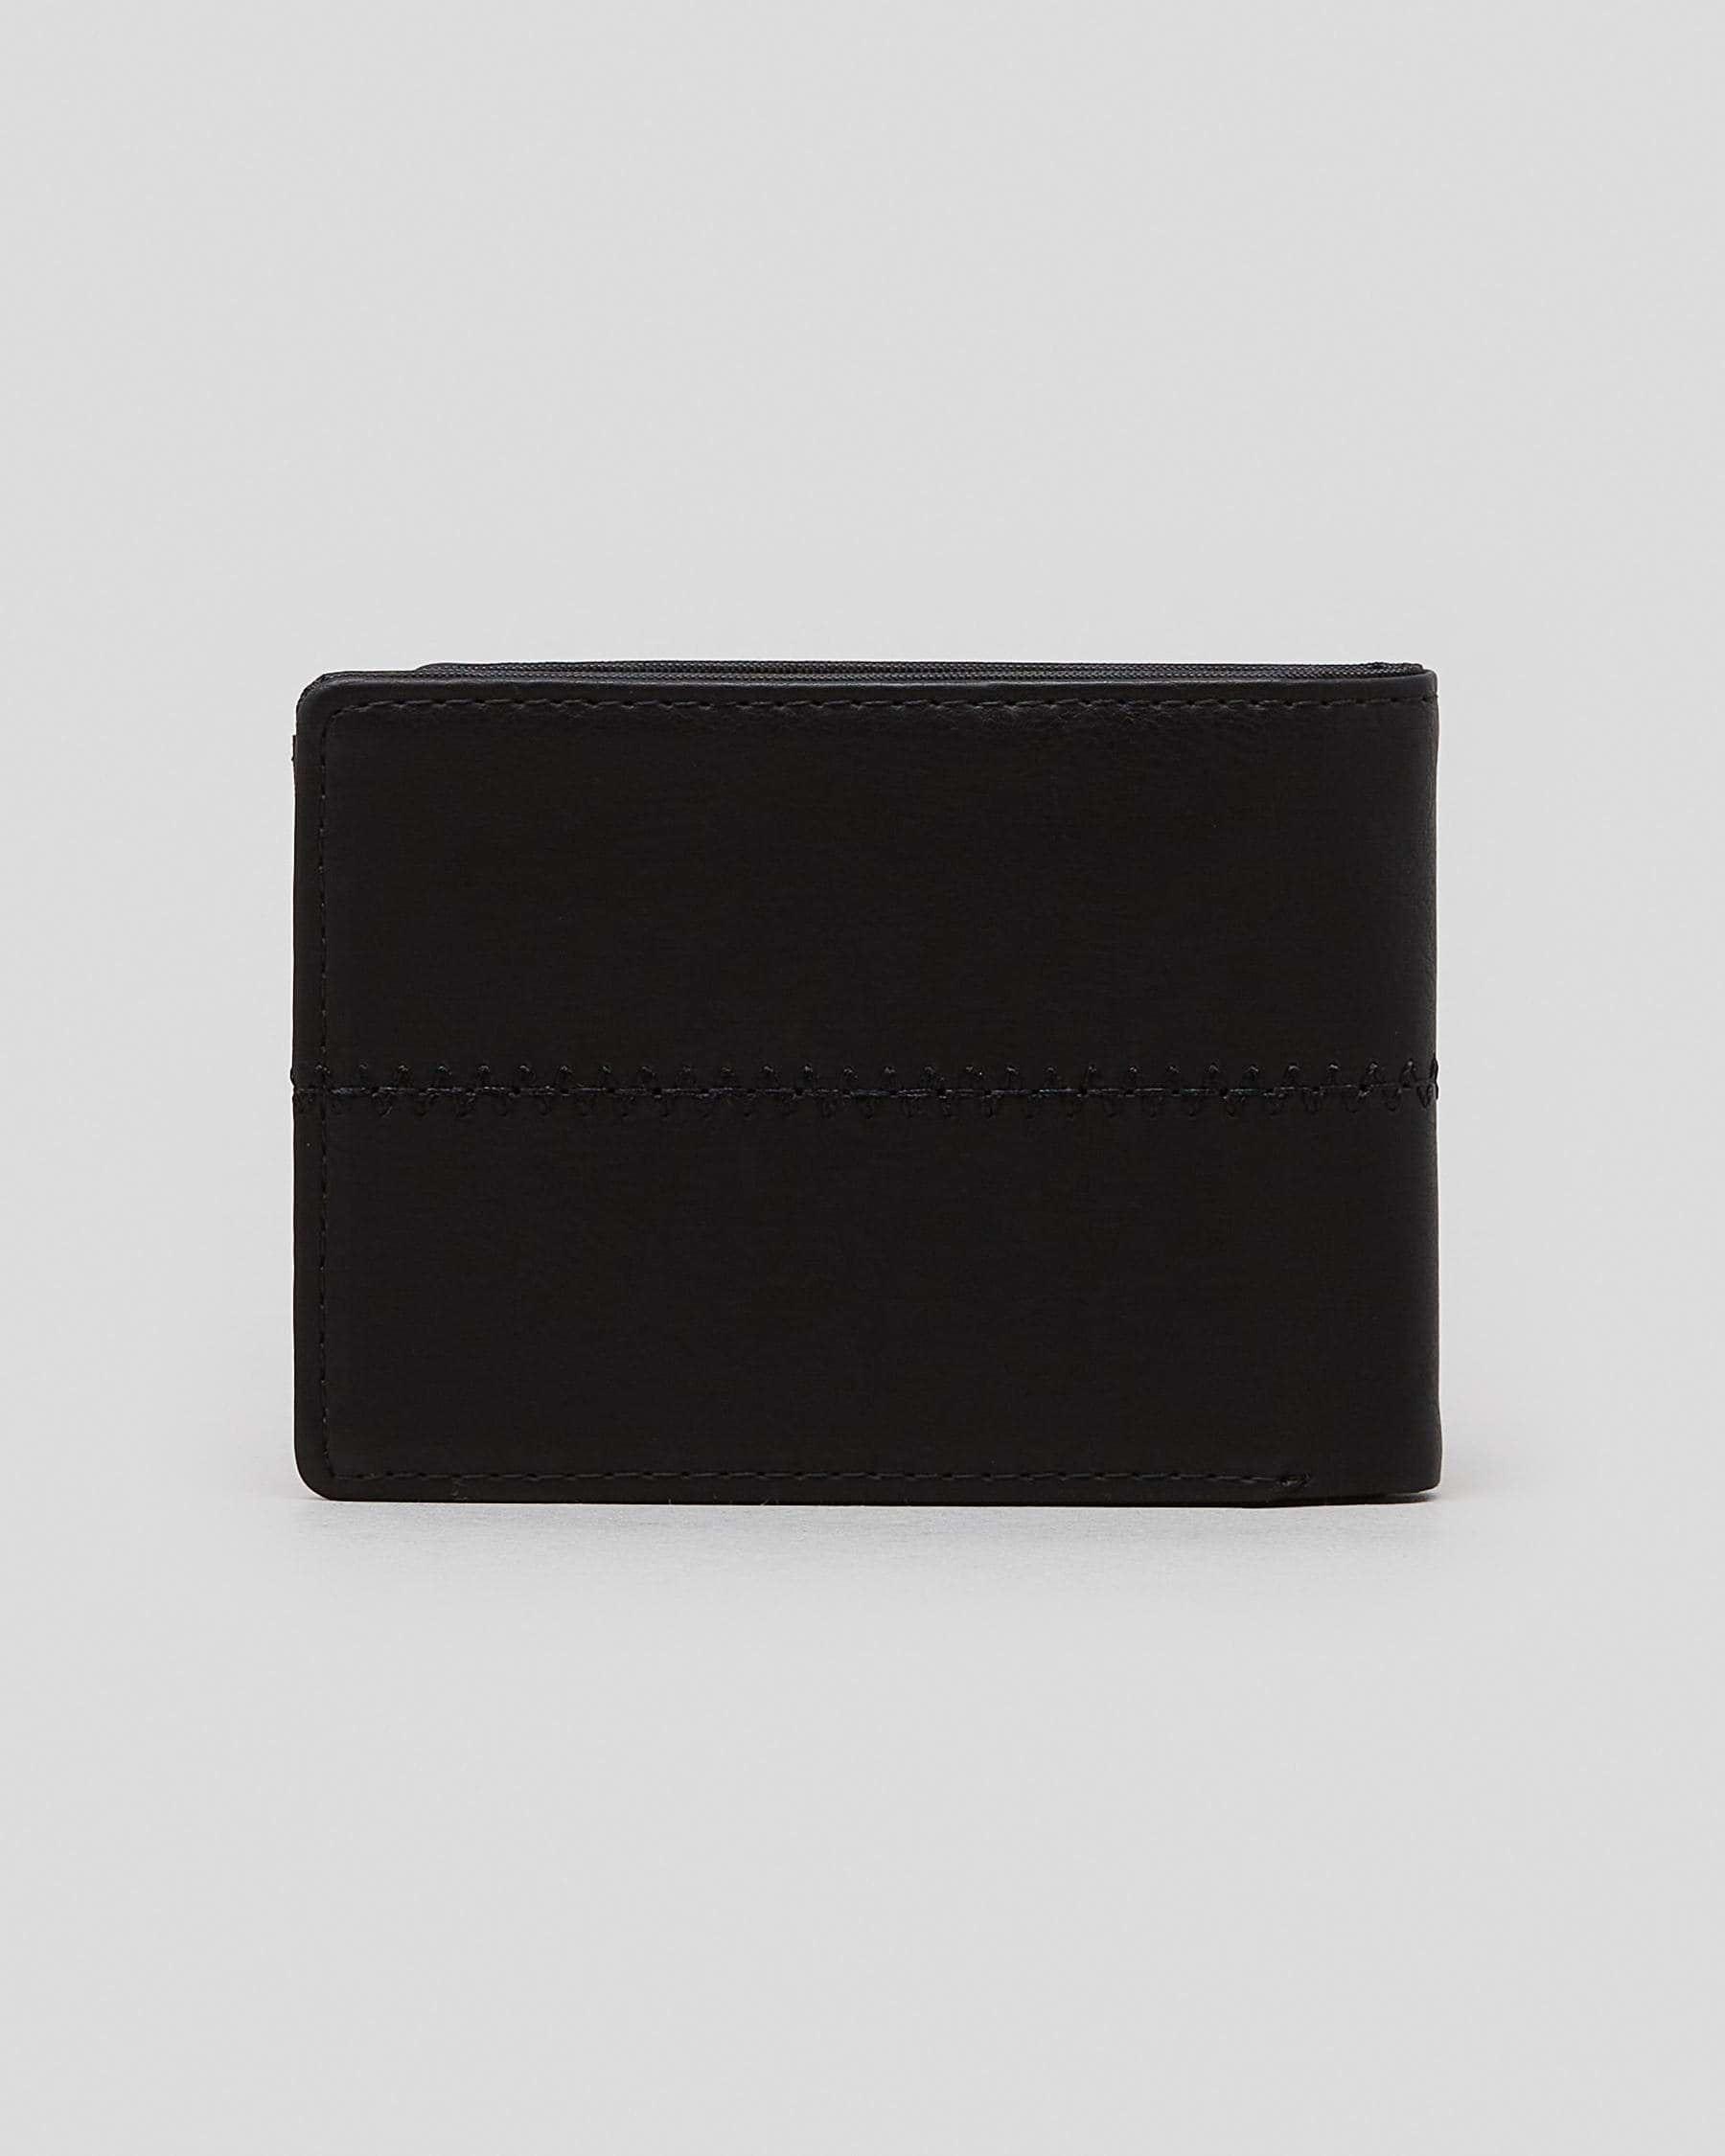 Quiksilver Stitchy 3 Wallet In Black Black - Fast Shipping & Easy ...